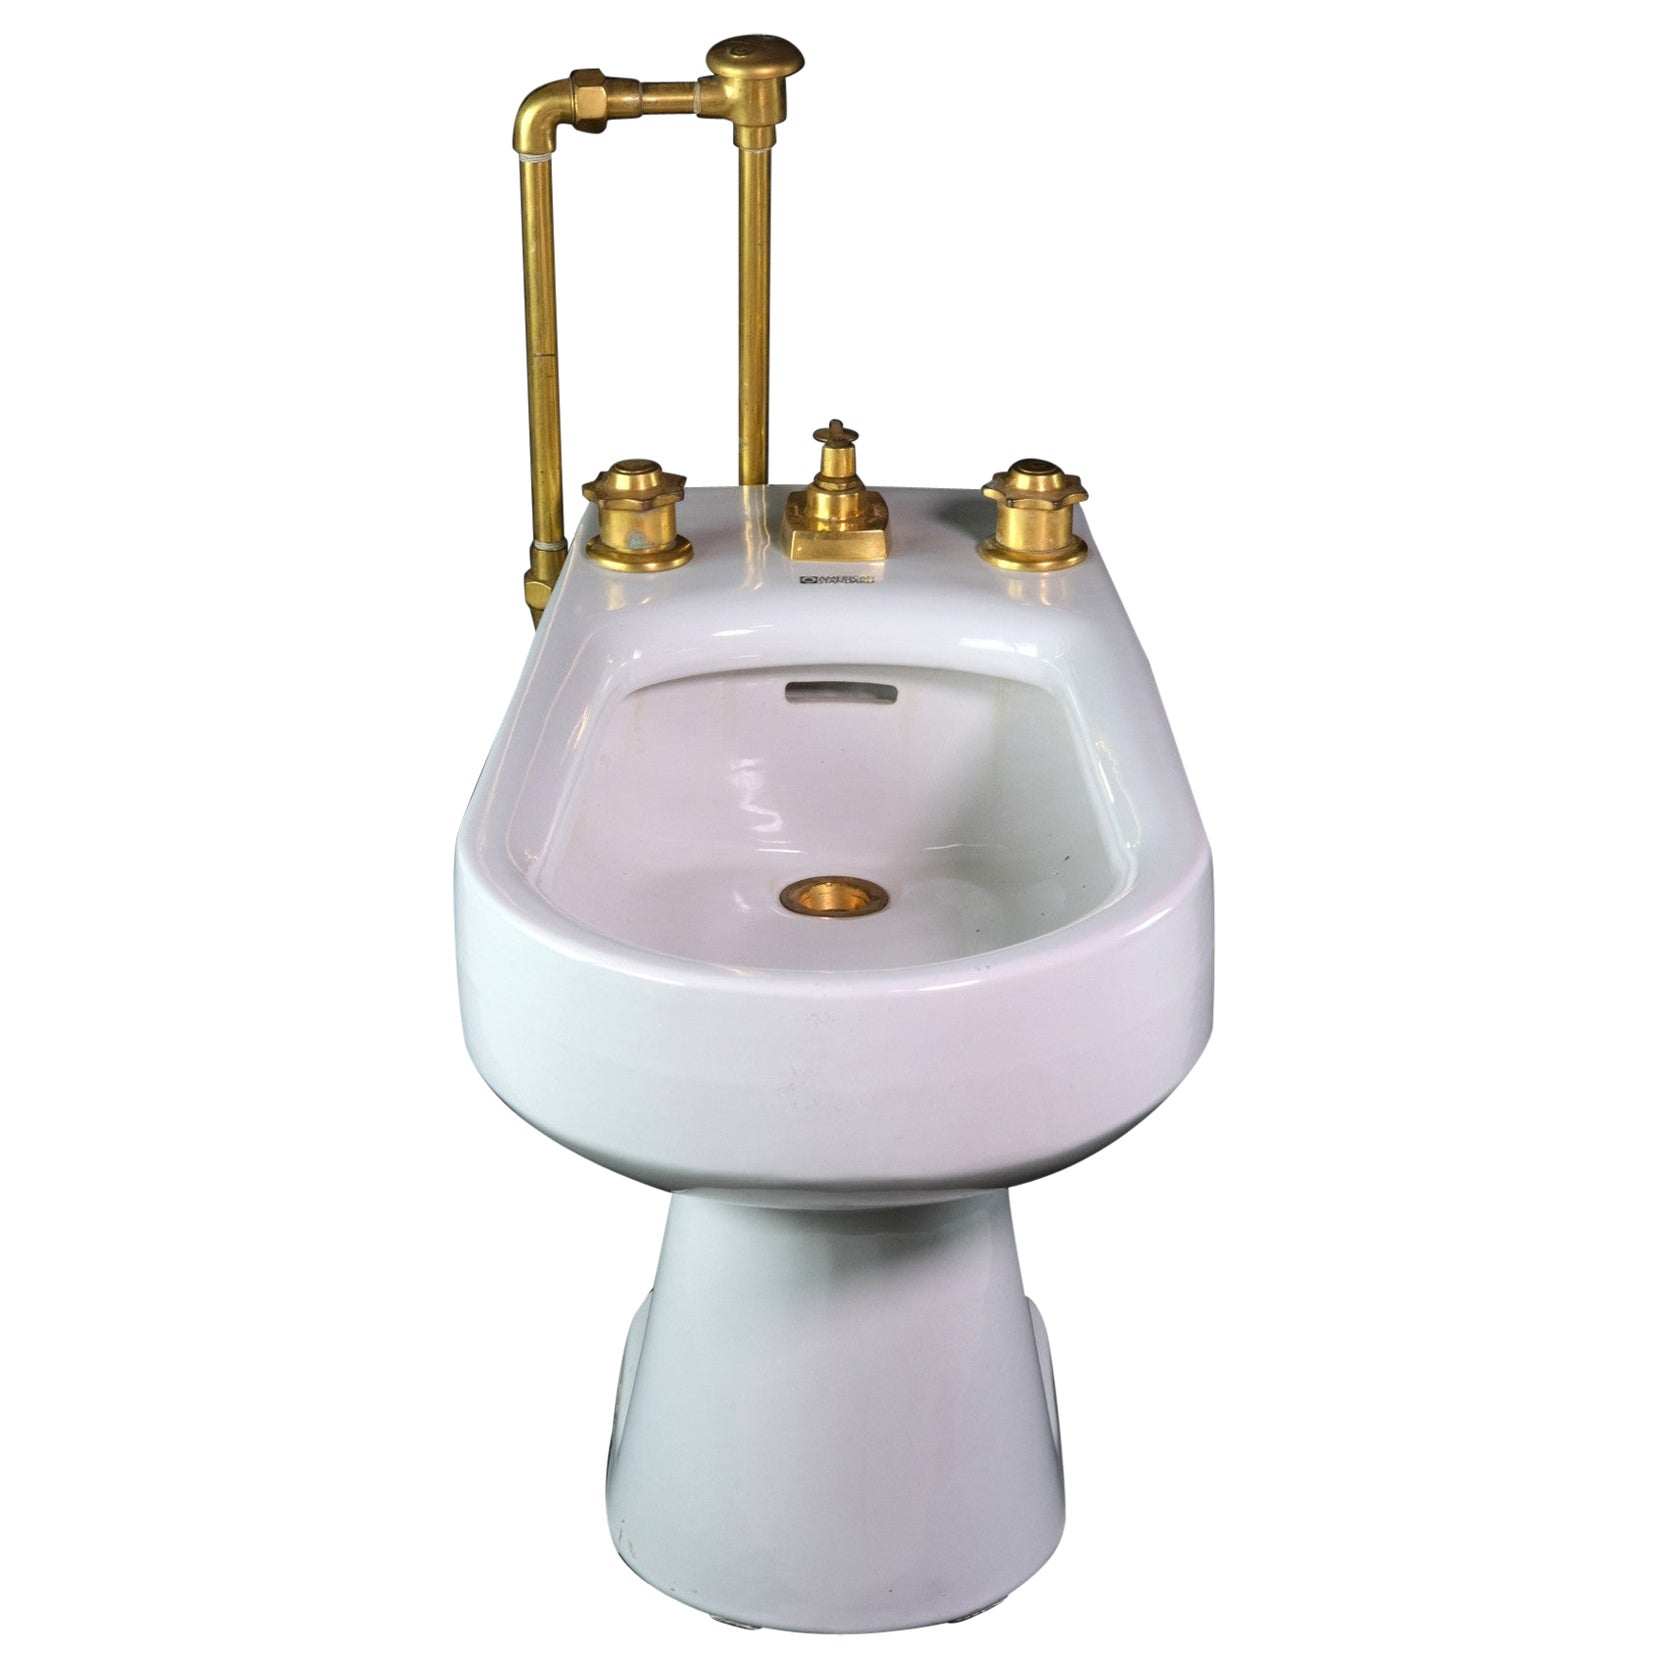 White Porcelain Bidet with Gold Plated Hardware by American Standard